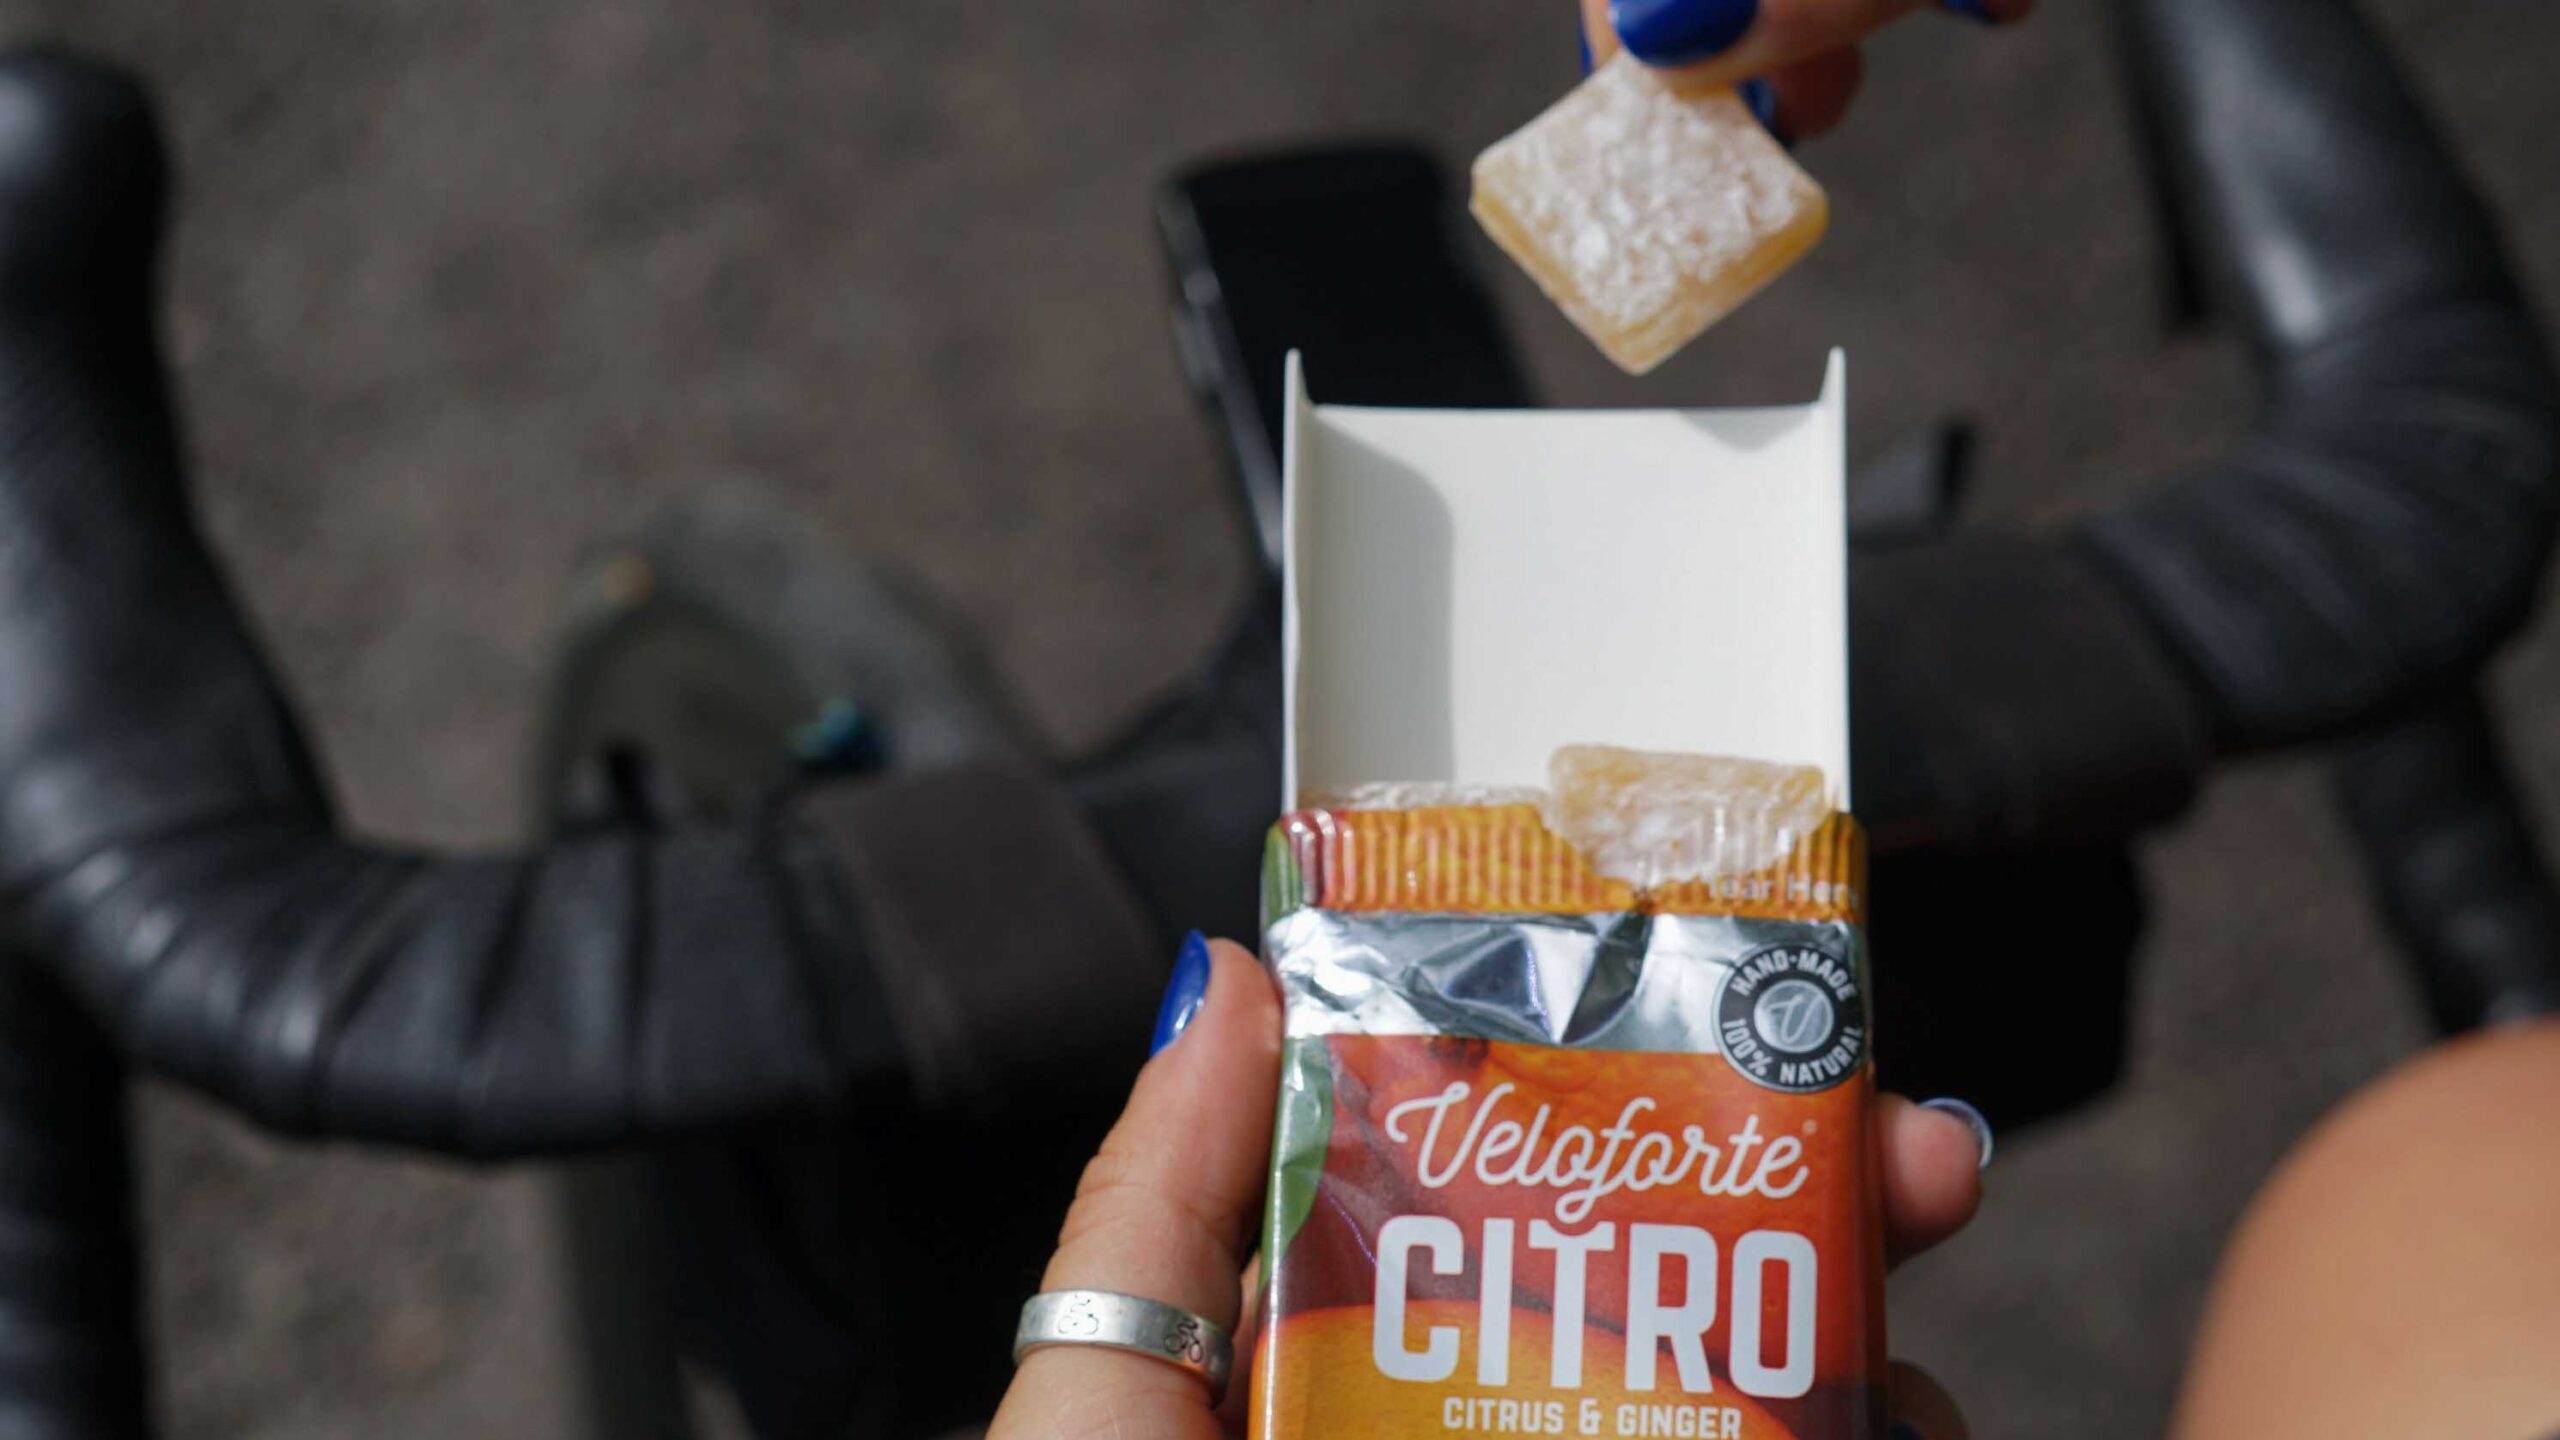 Packet of Citro cycling chews by Veloforte